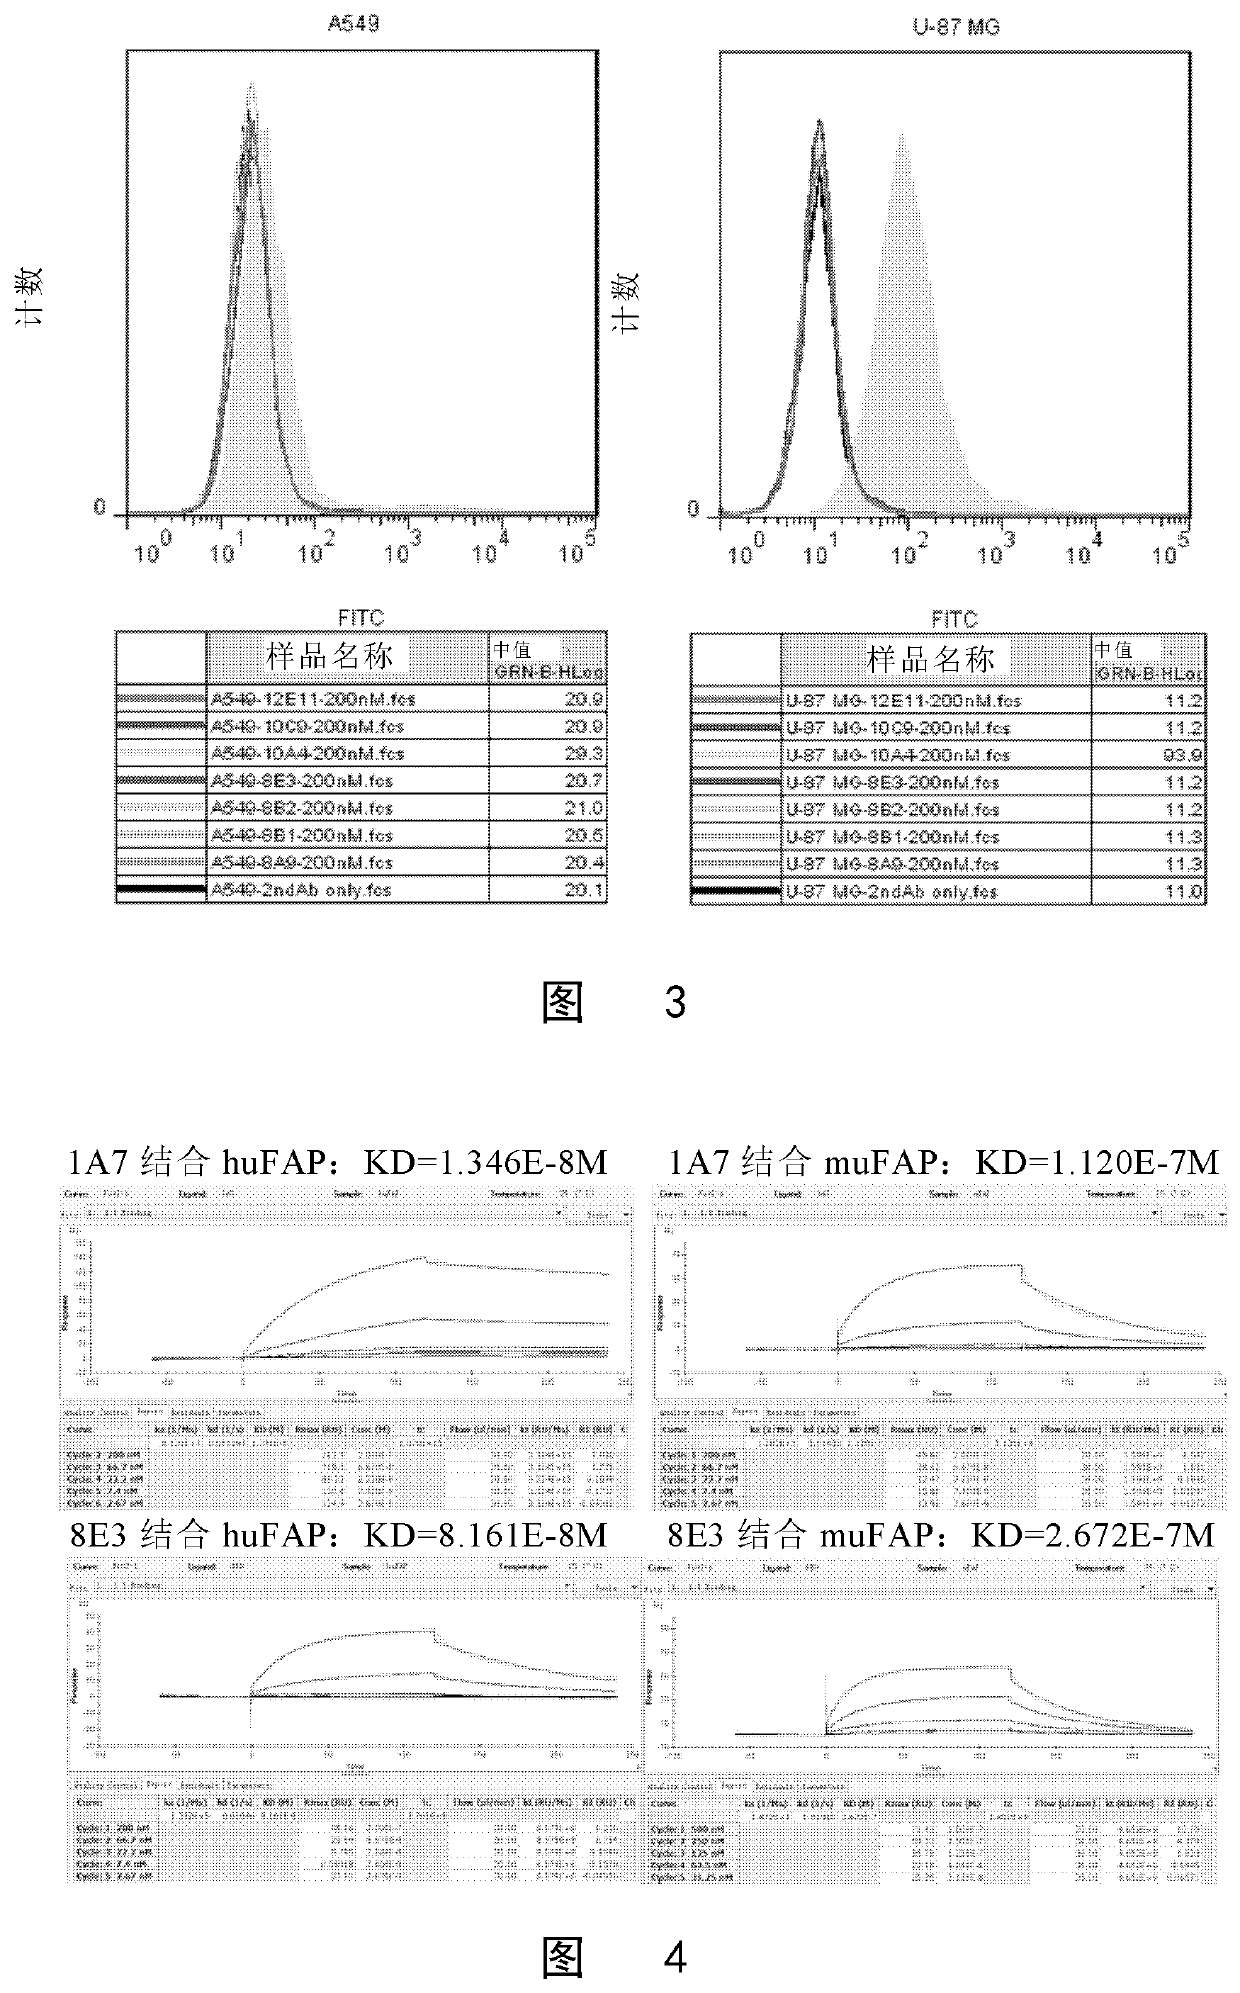 BINDING UNIT TARGETING FIBROBLAST ACTIVATION PROTEIN alpha AND APPLICATION THEREOF